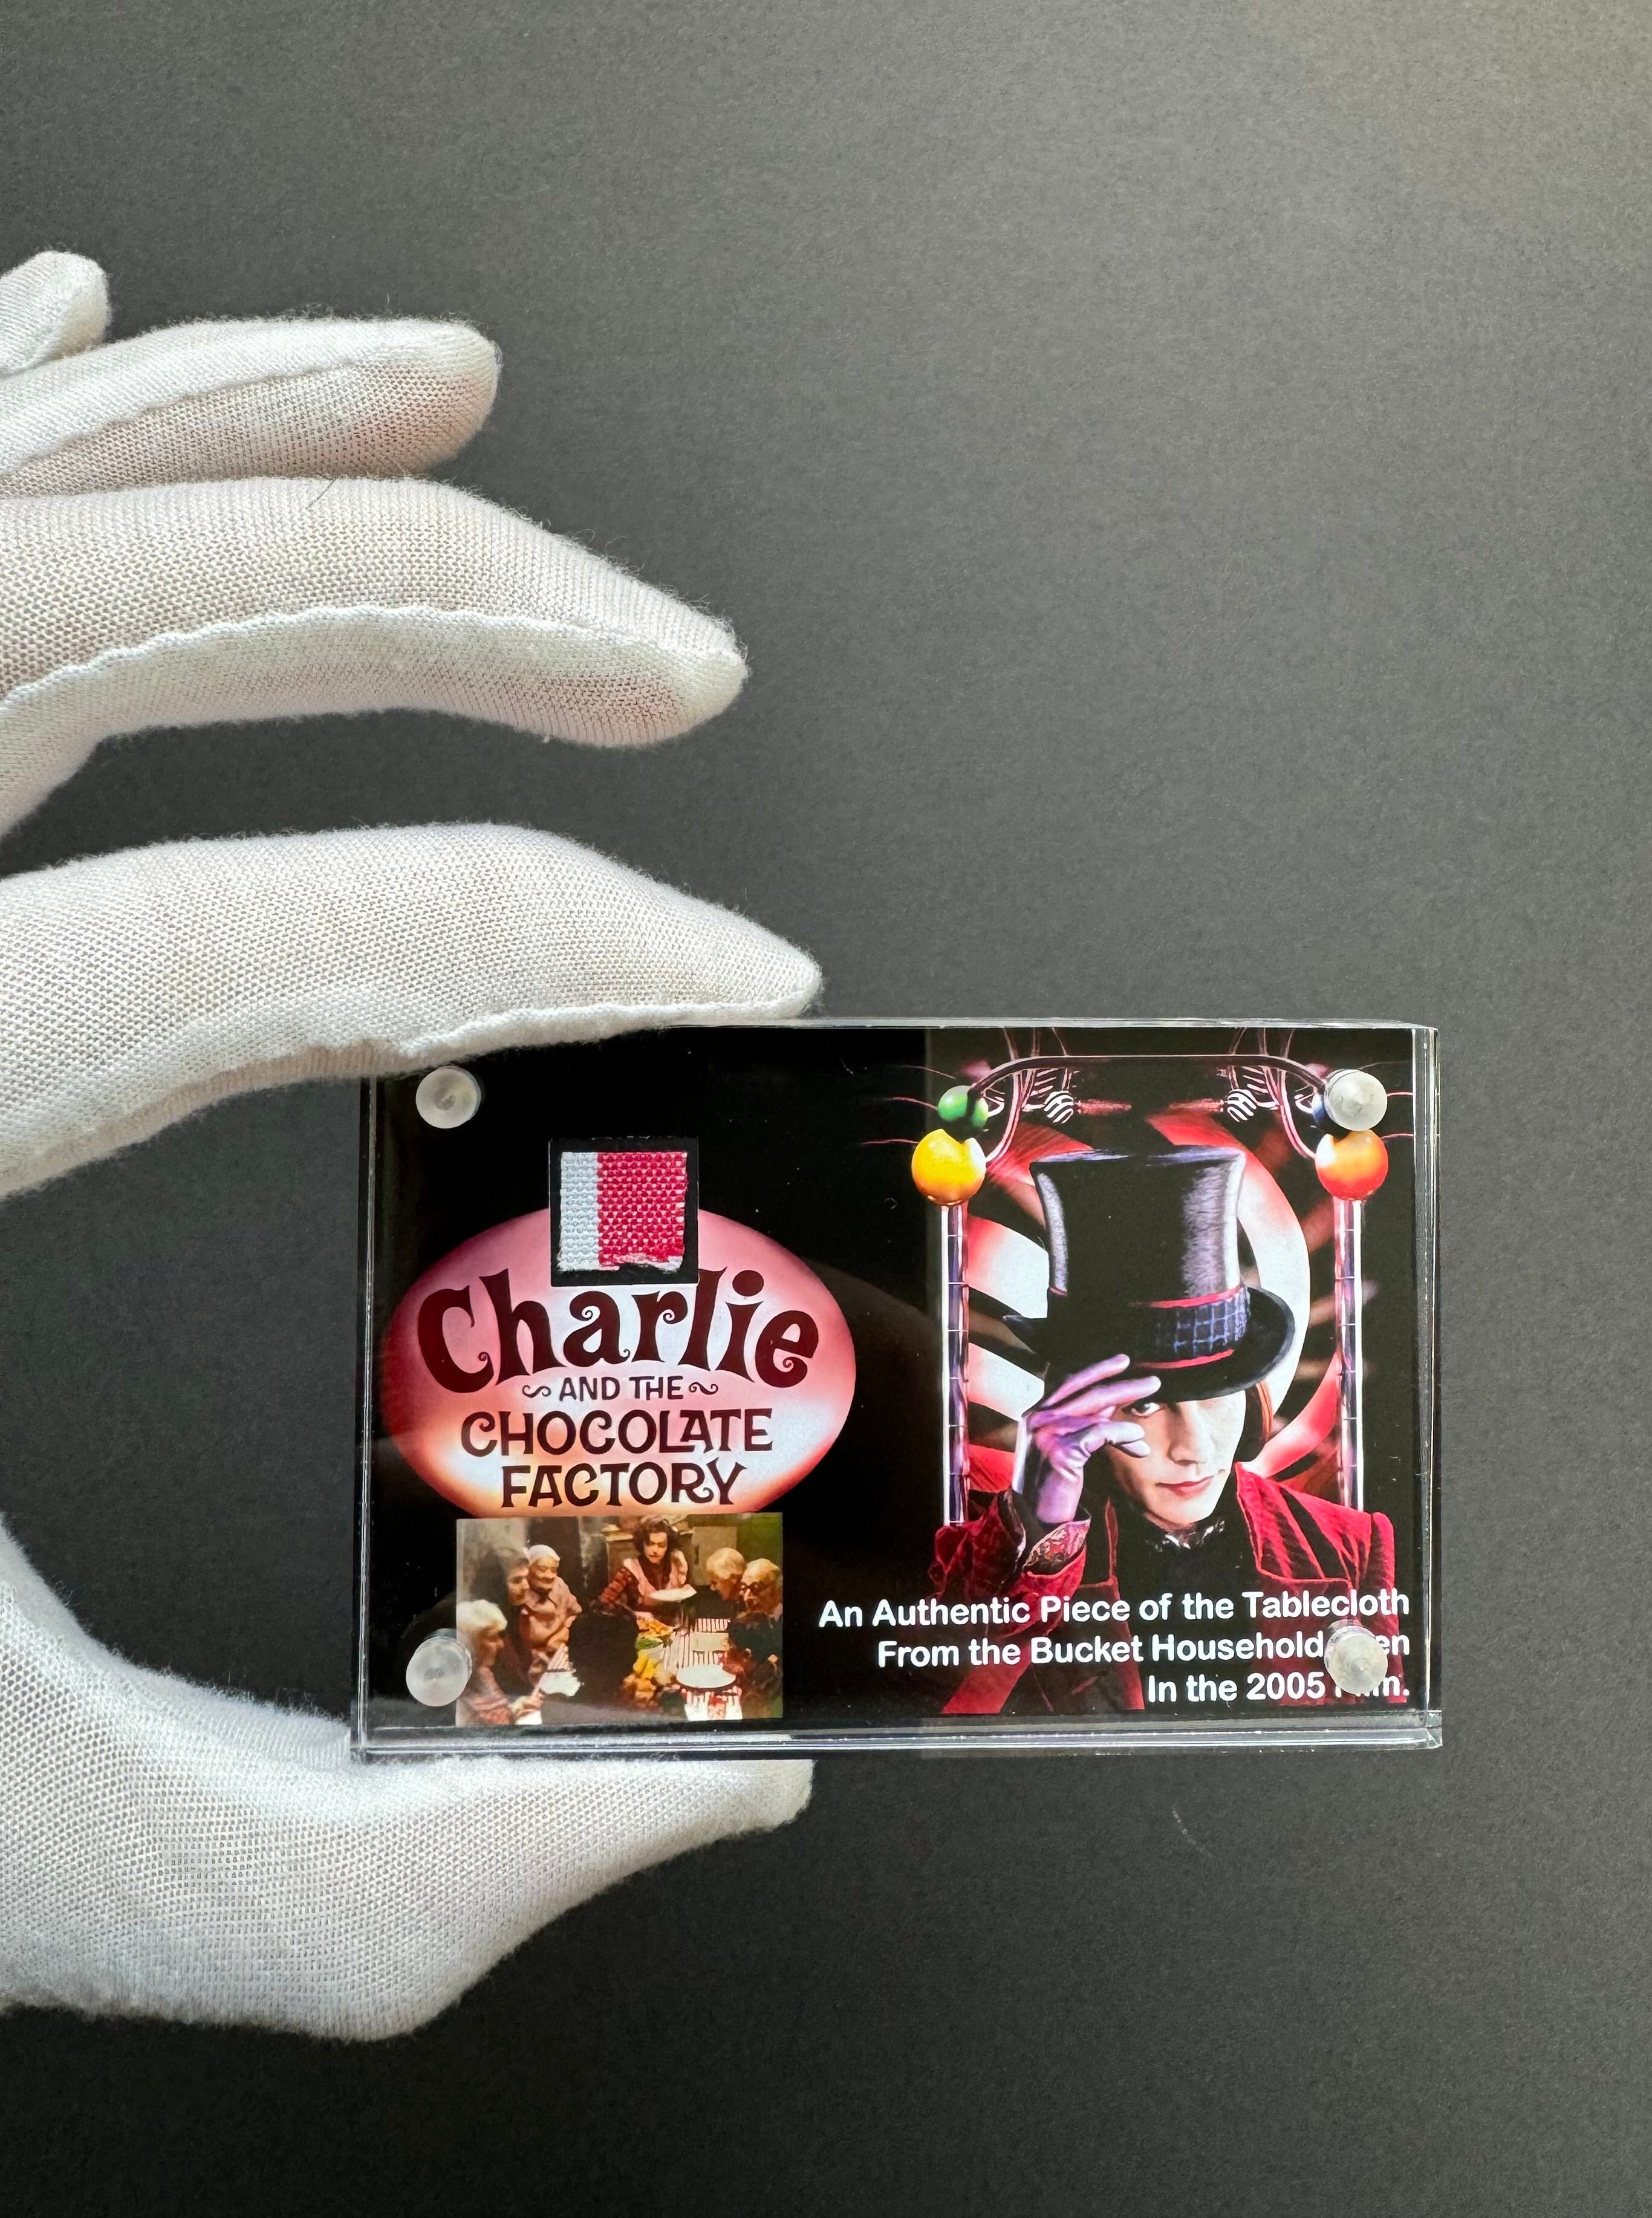 Charlie & The Chocolate Factory (2005) - A Miniature Prop Display